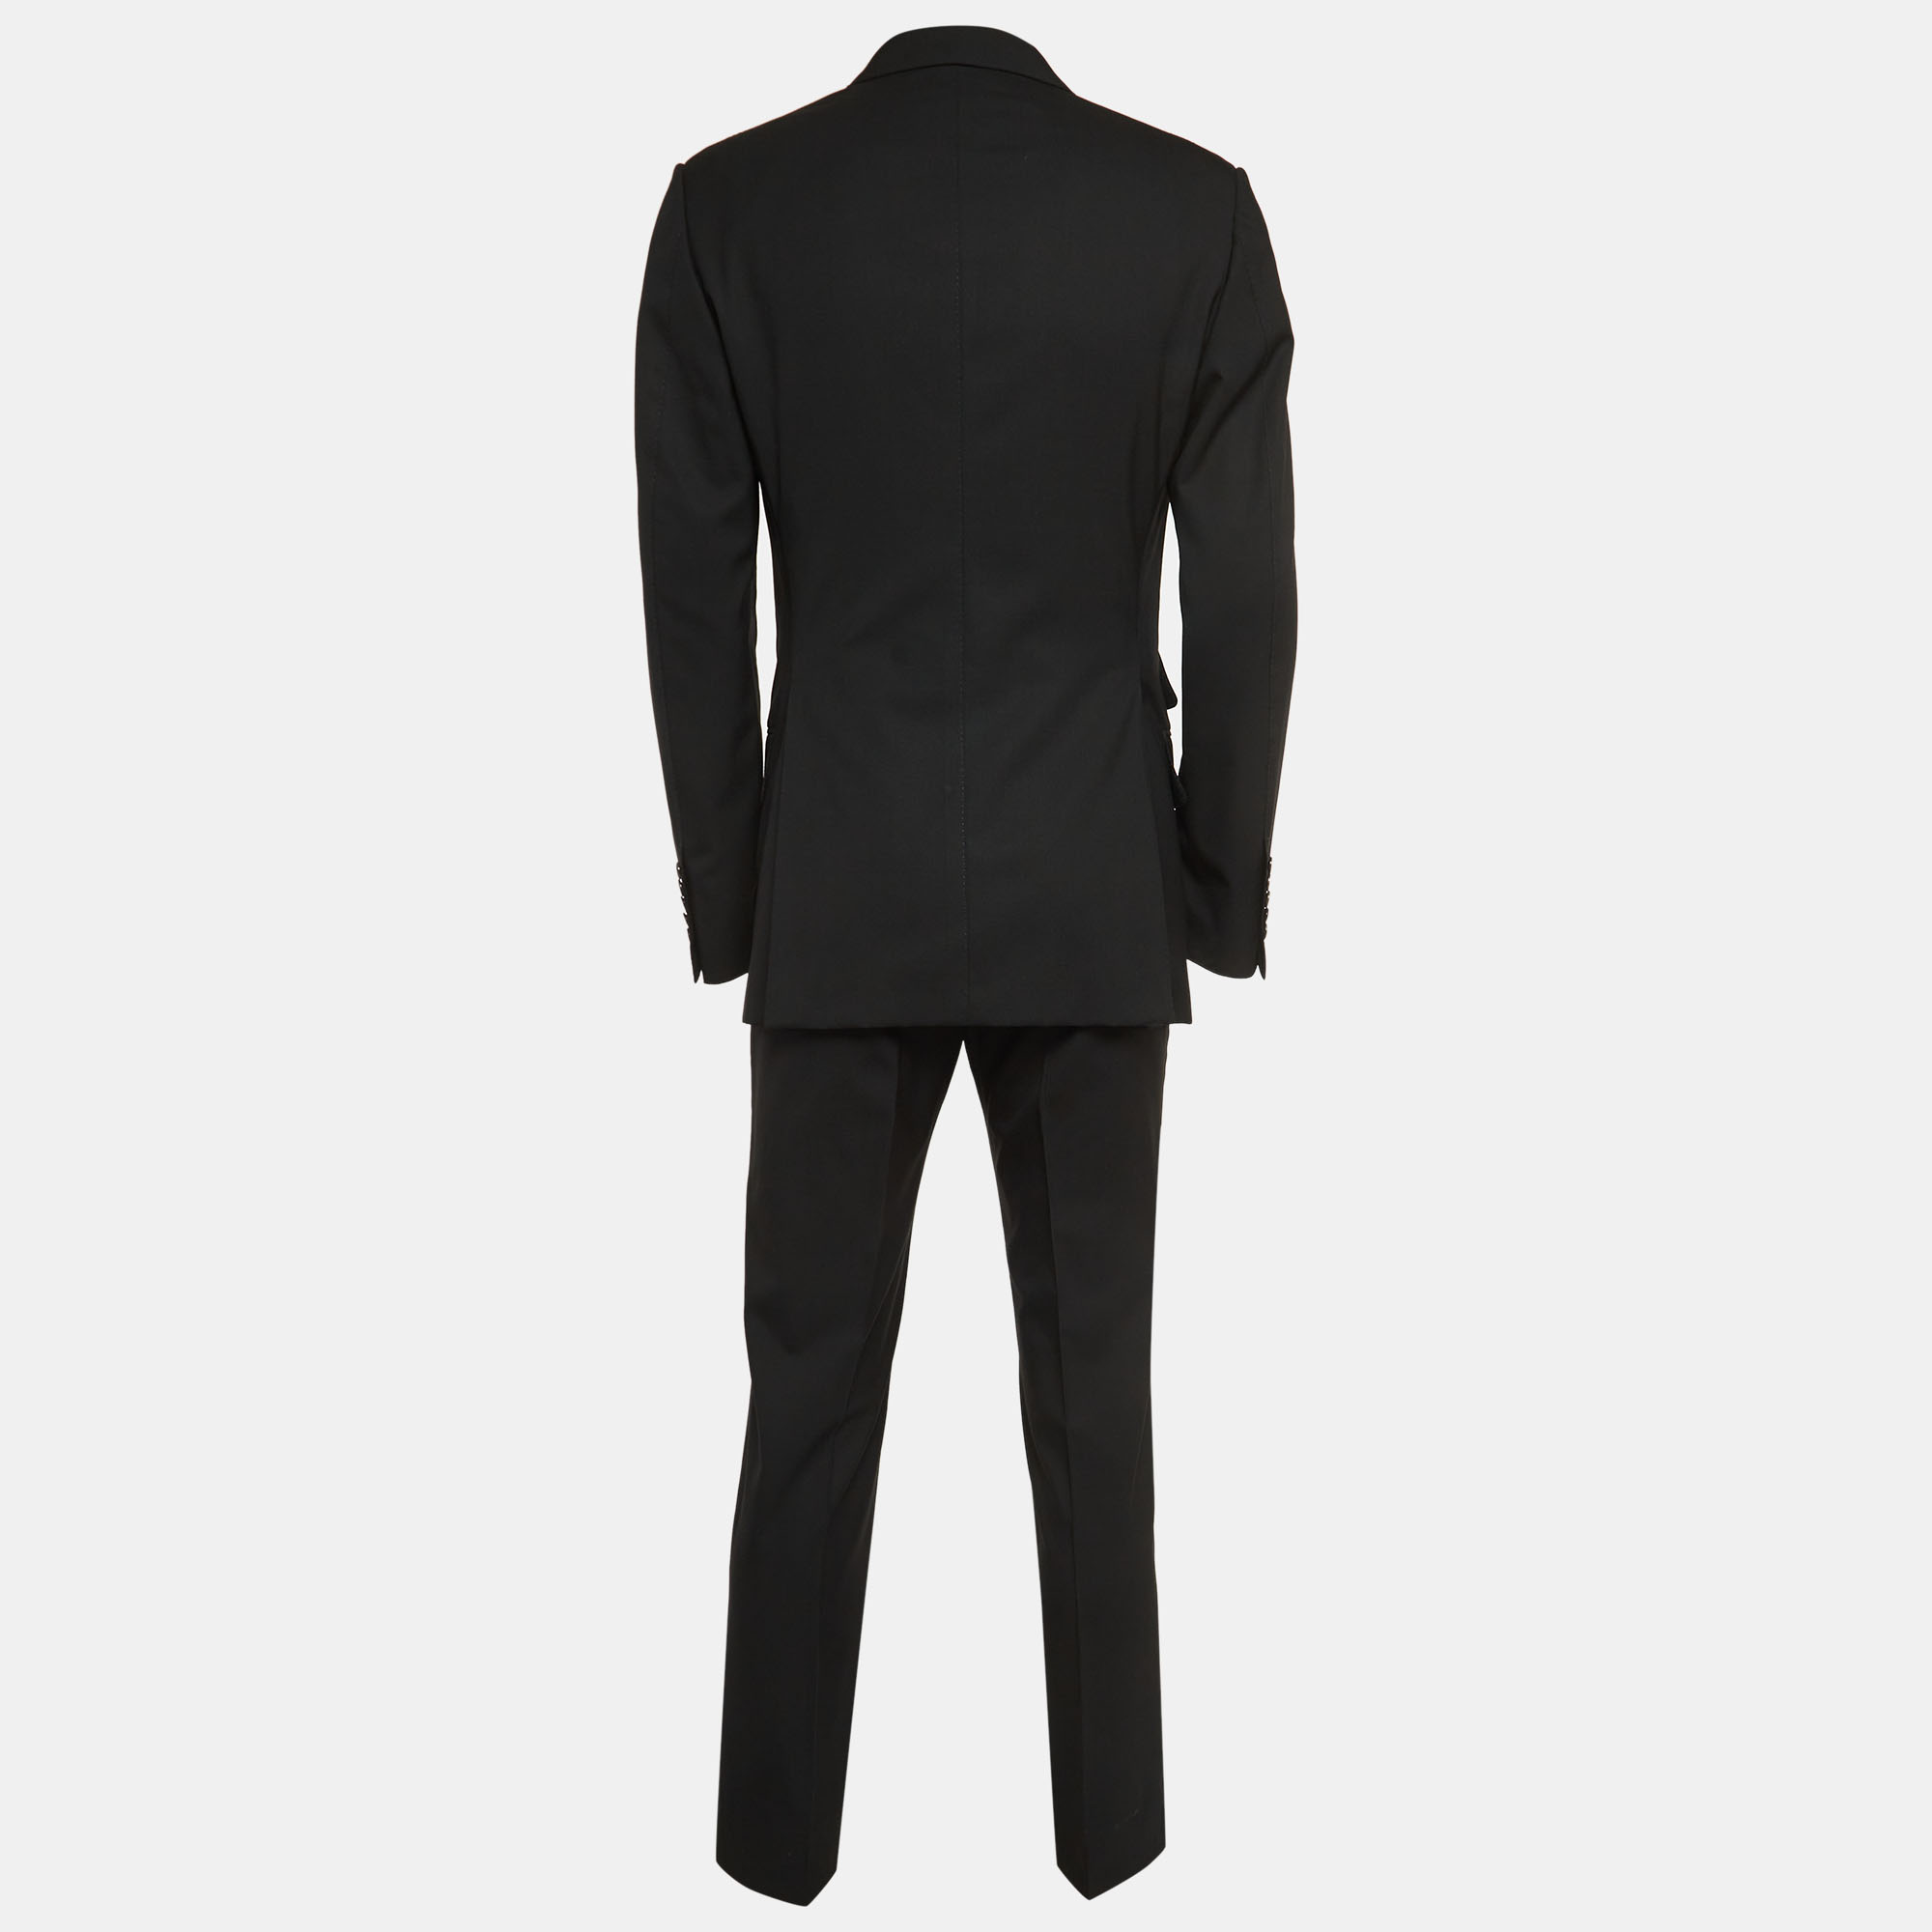 

Tom Ford Black Wool Single Breasted Suit